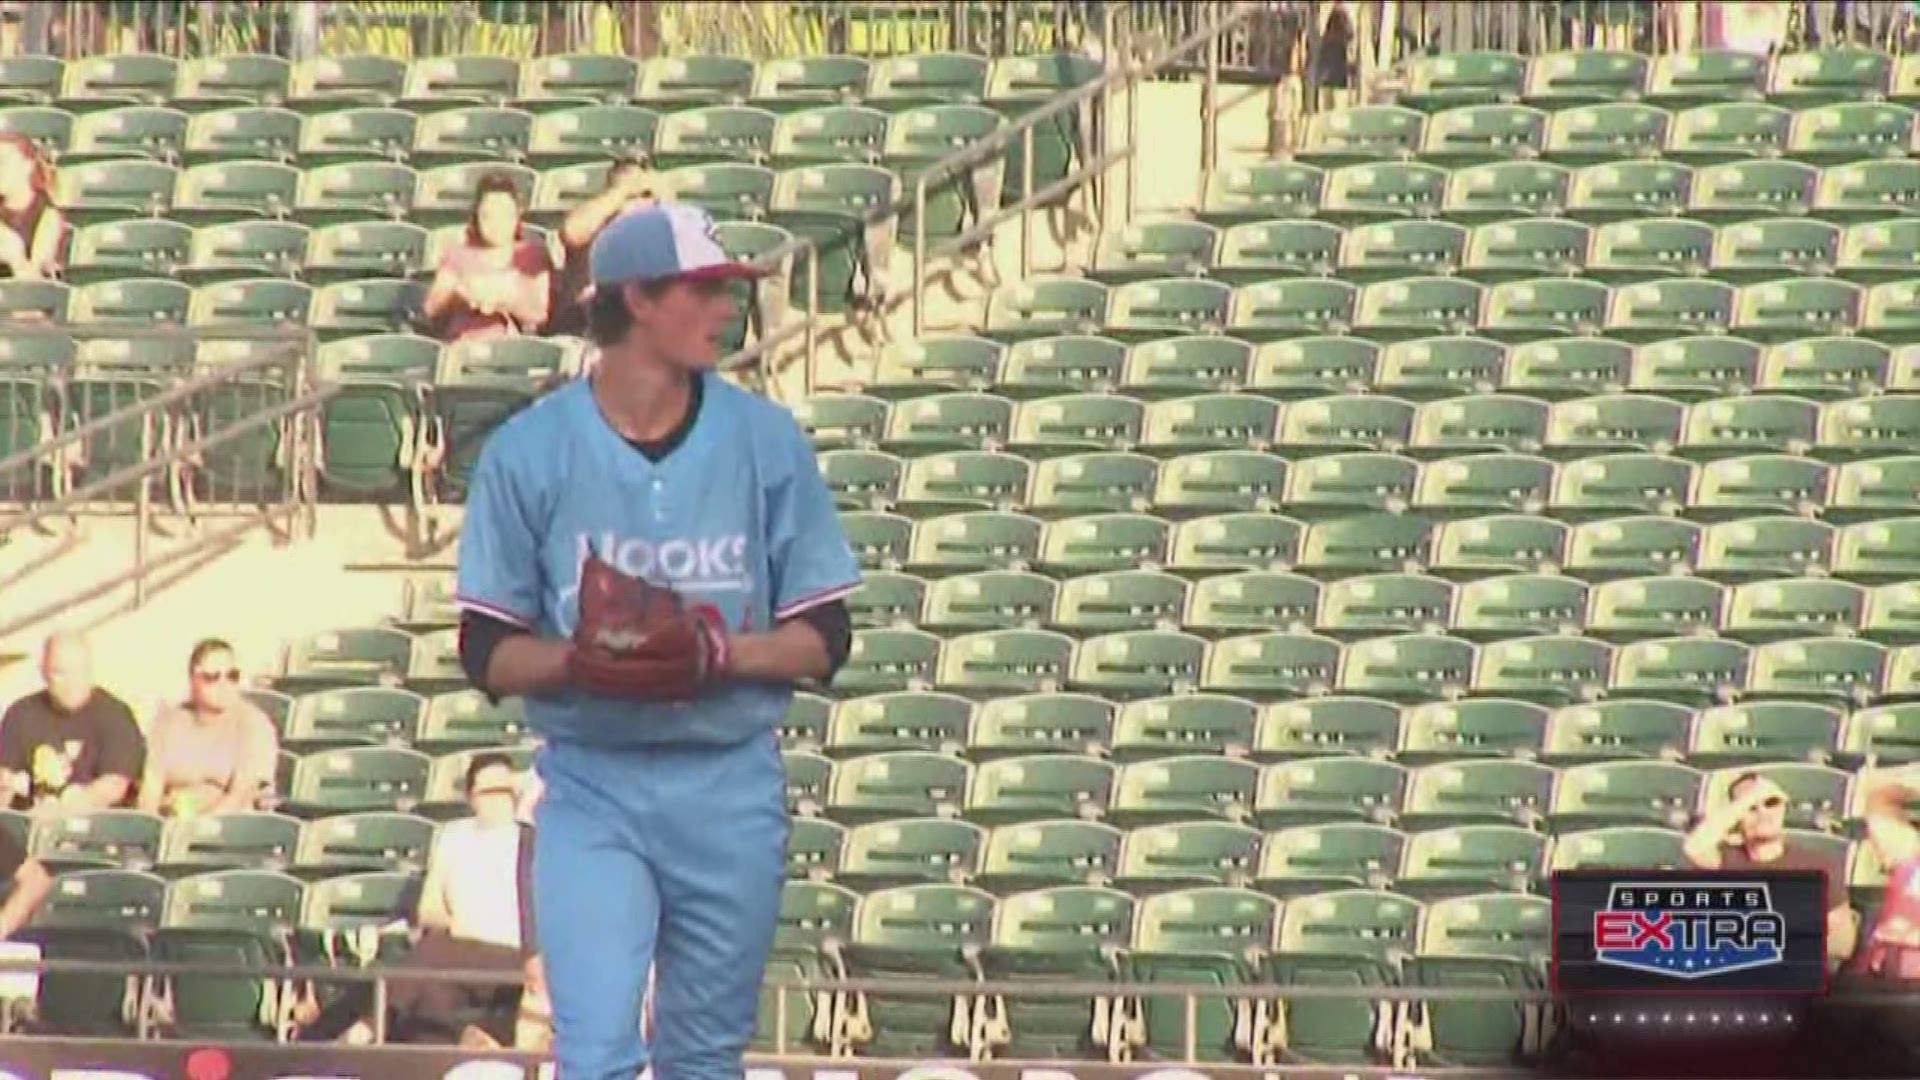 Watch Matt Musil's report on the up-and-comers from the Houston Astros farm system.